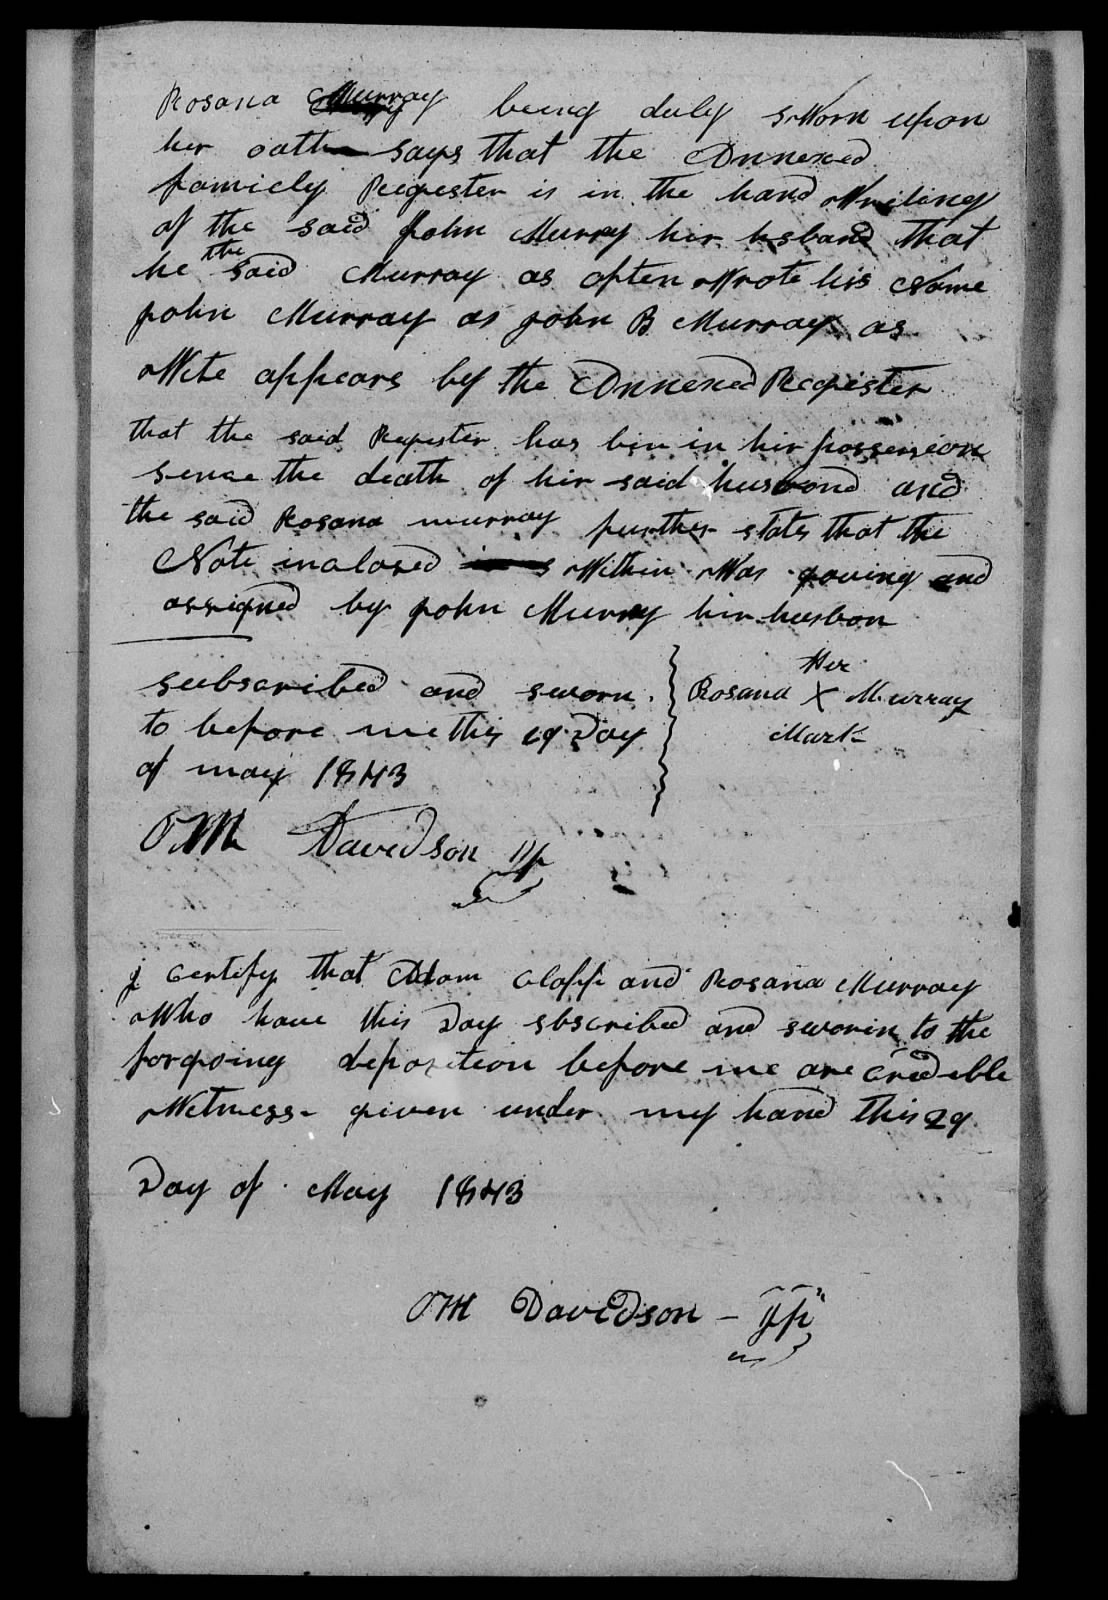 Affidavit of Rosana Murray in support of her Pension Claim, 29 May 1843, page 1